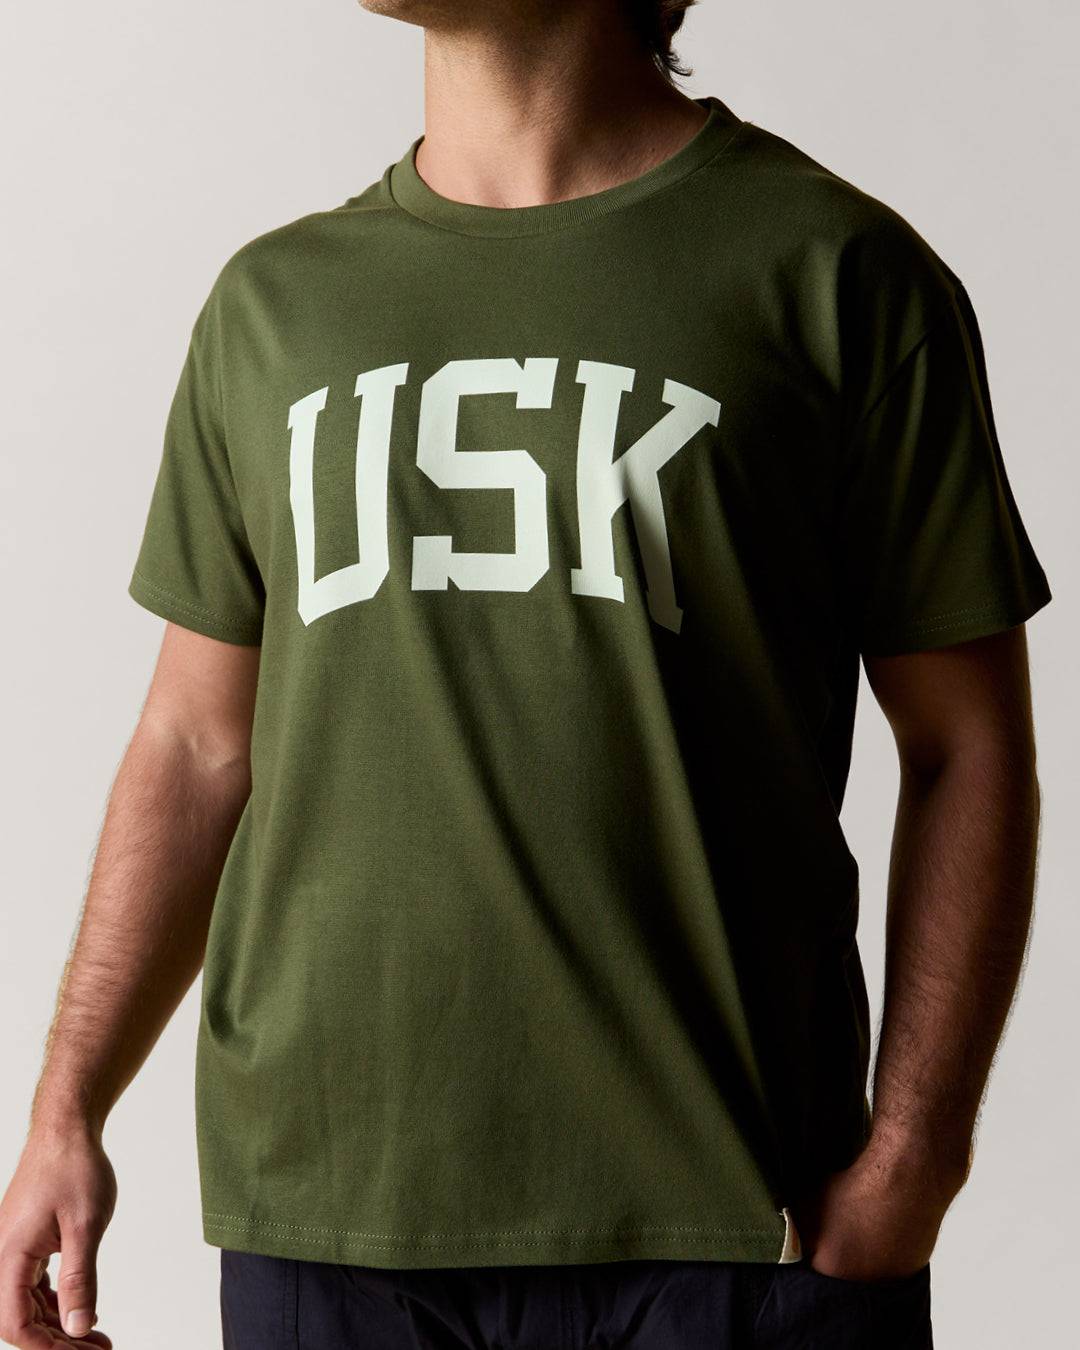 Model shot of uskees men's signature tee in green showing white USK logo on the front.